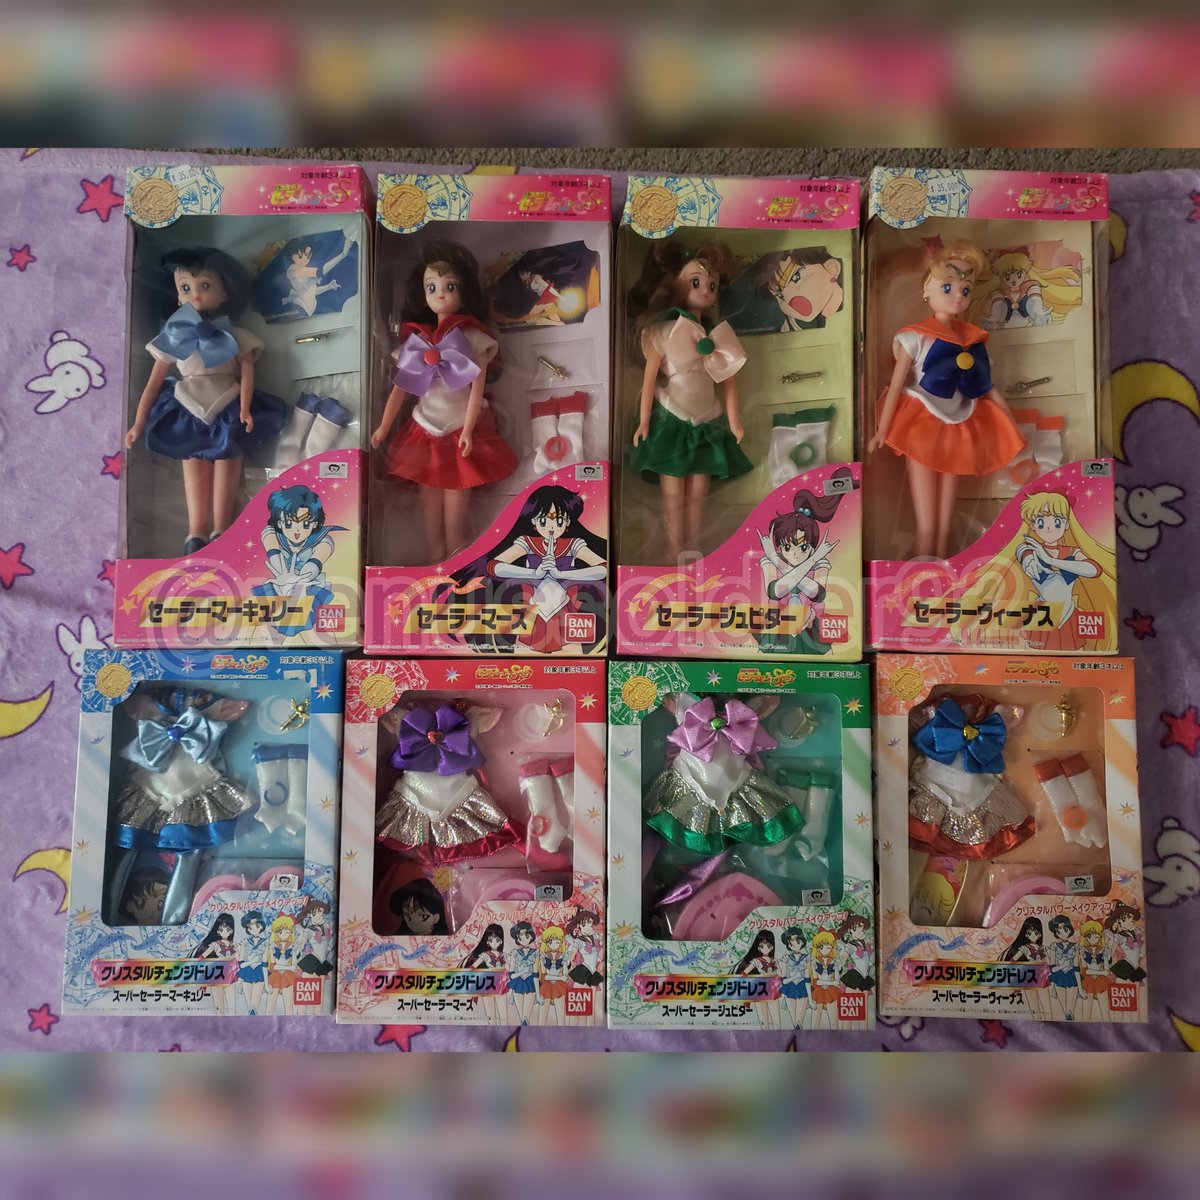 Inner SuperS Dollies with SuperS fashion Packs circa 1995
#sailormoon #sailormooncollection #prettyguardiansailormoon #dollcollector #dollphotography #dollsofinstagram #sailormooncollectibles